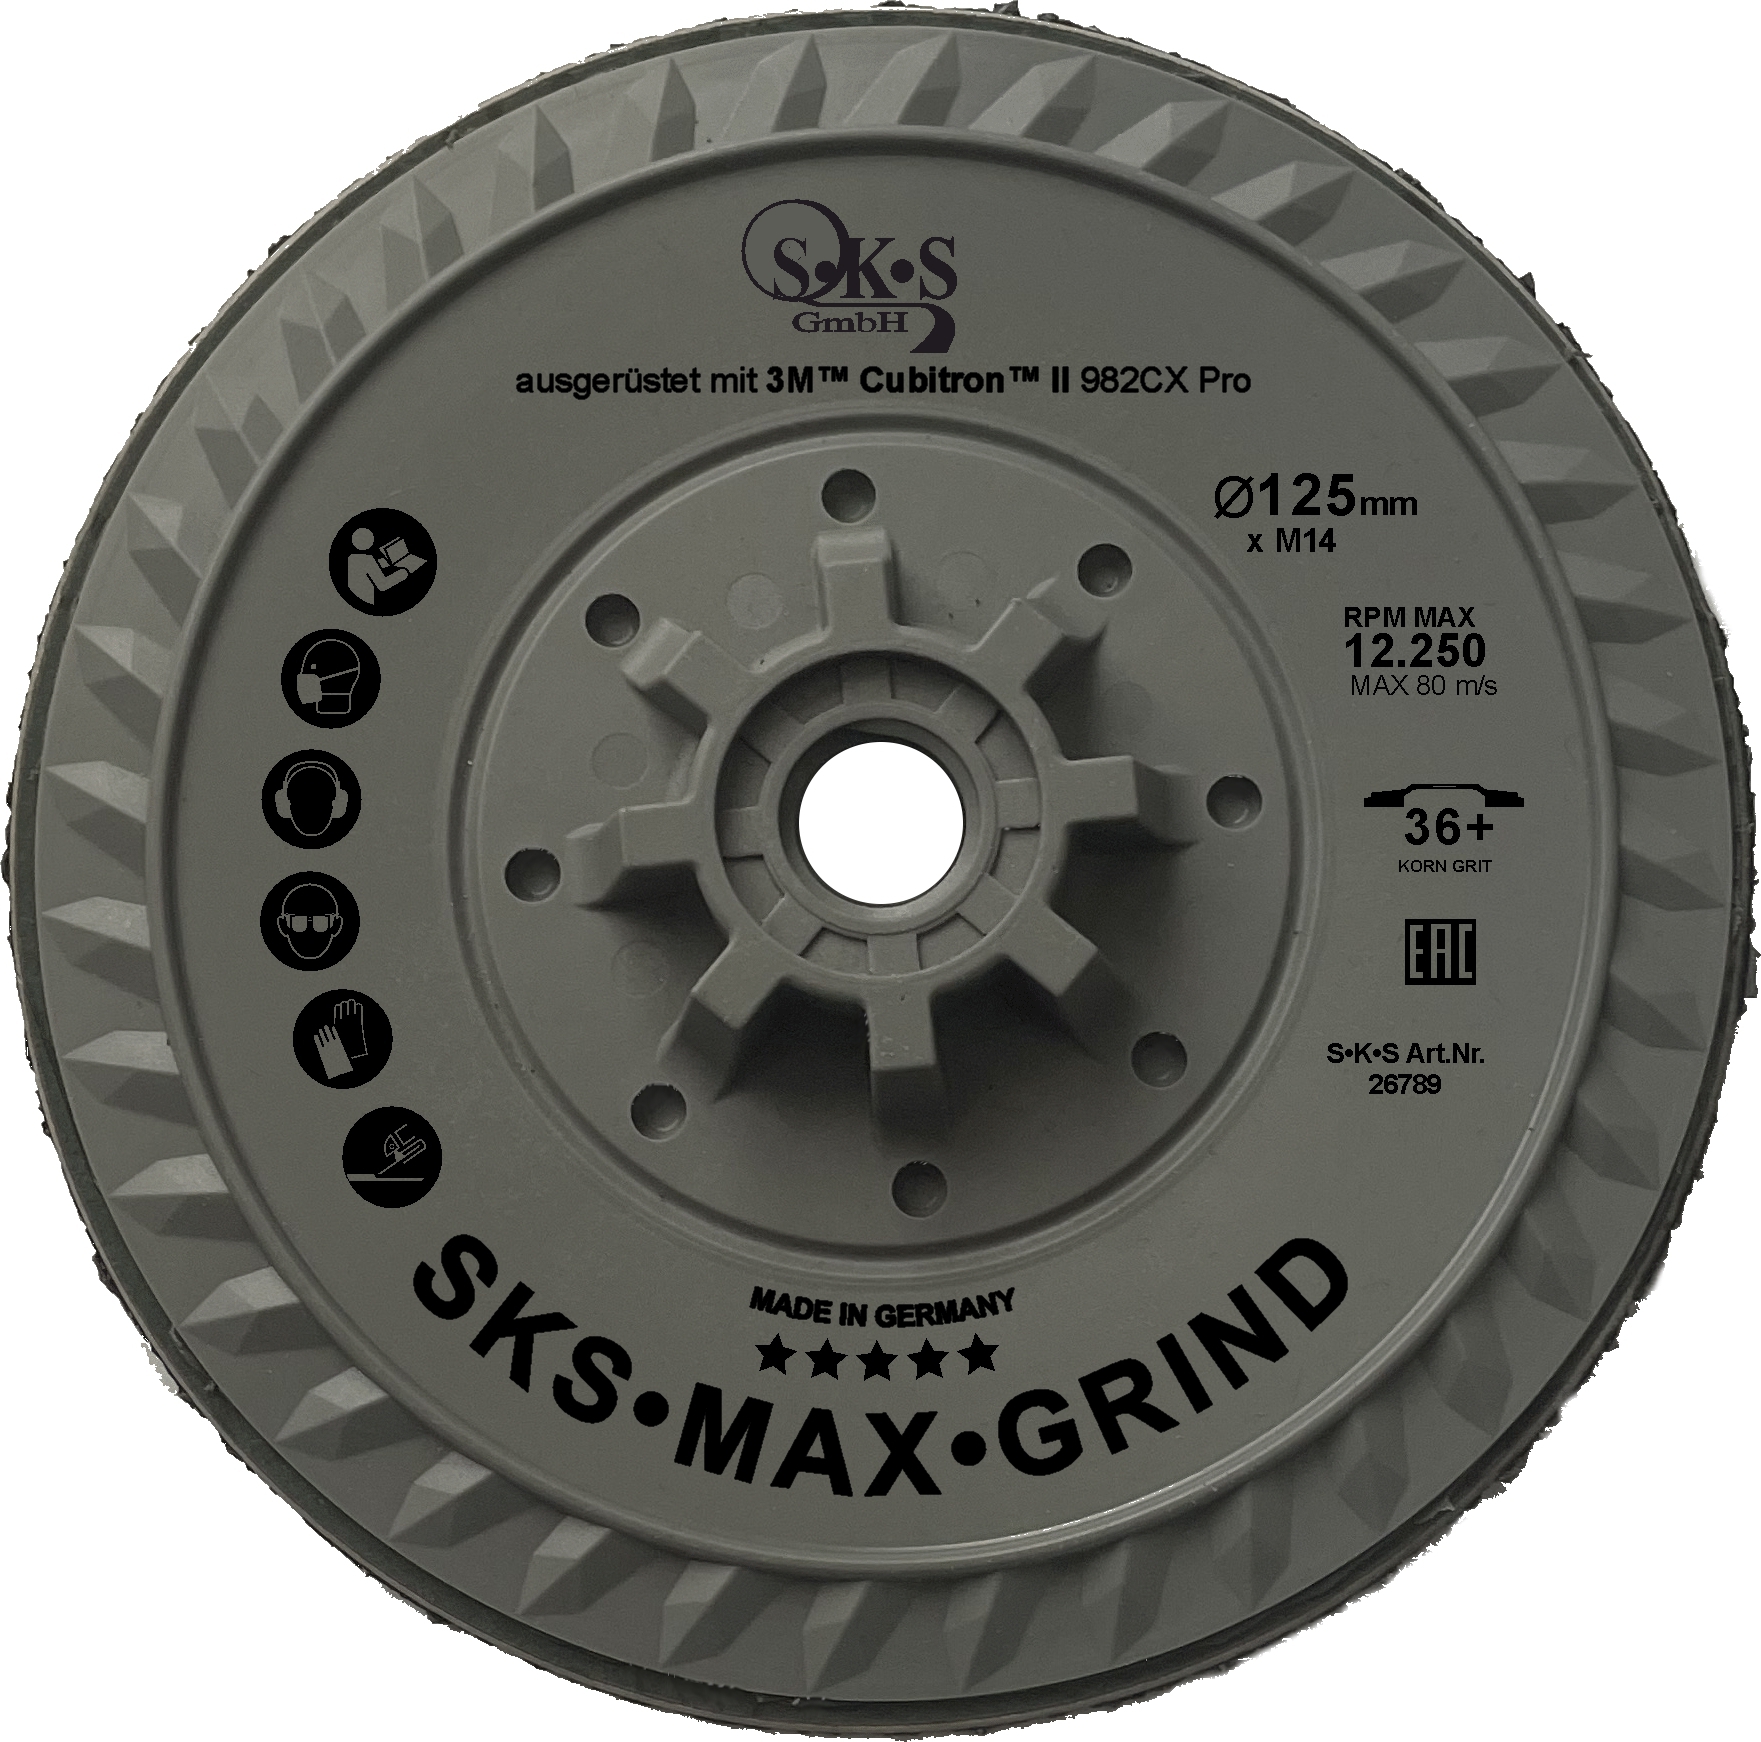 S-K-S Max Grind, 3M Cubitron II Fibre disc 982CX Pro, 125mm, grit size 36+, with M14 threaded mountings